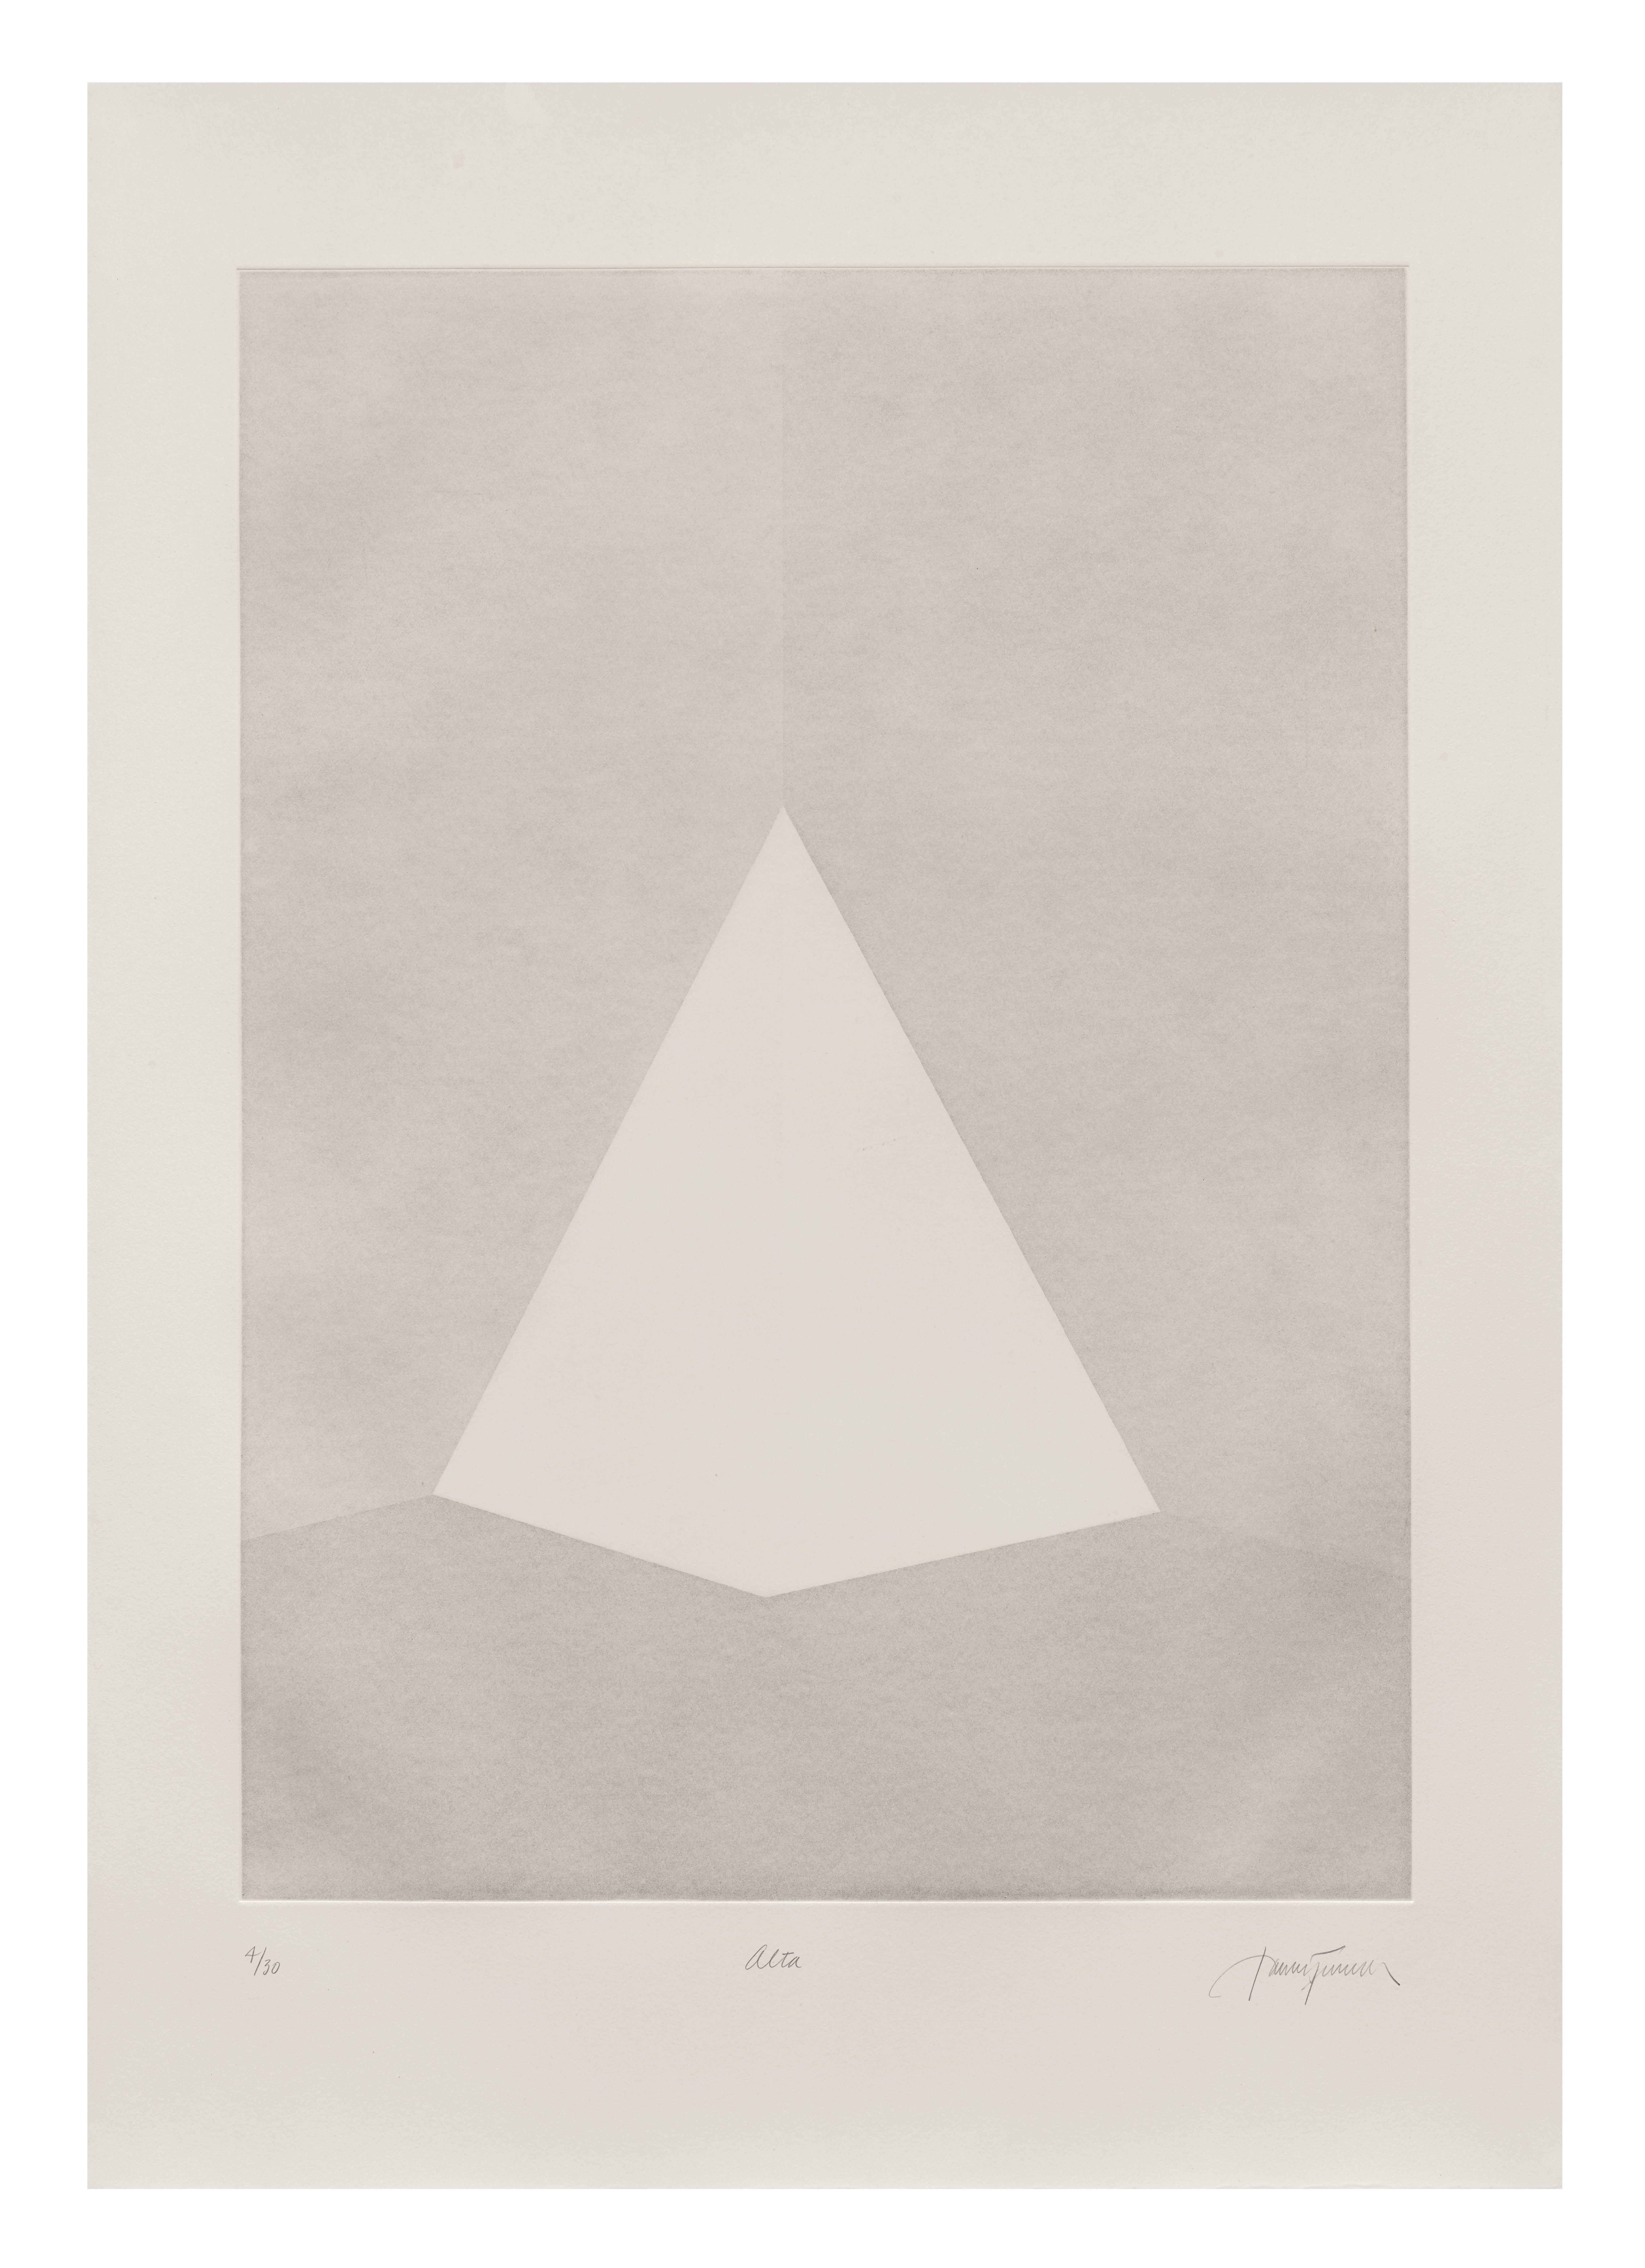 Alta - Print by James Turrell